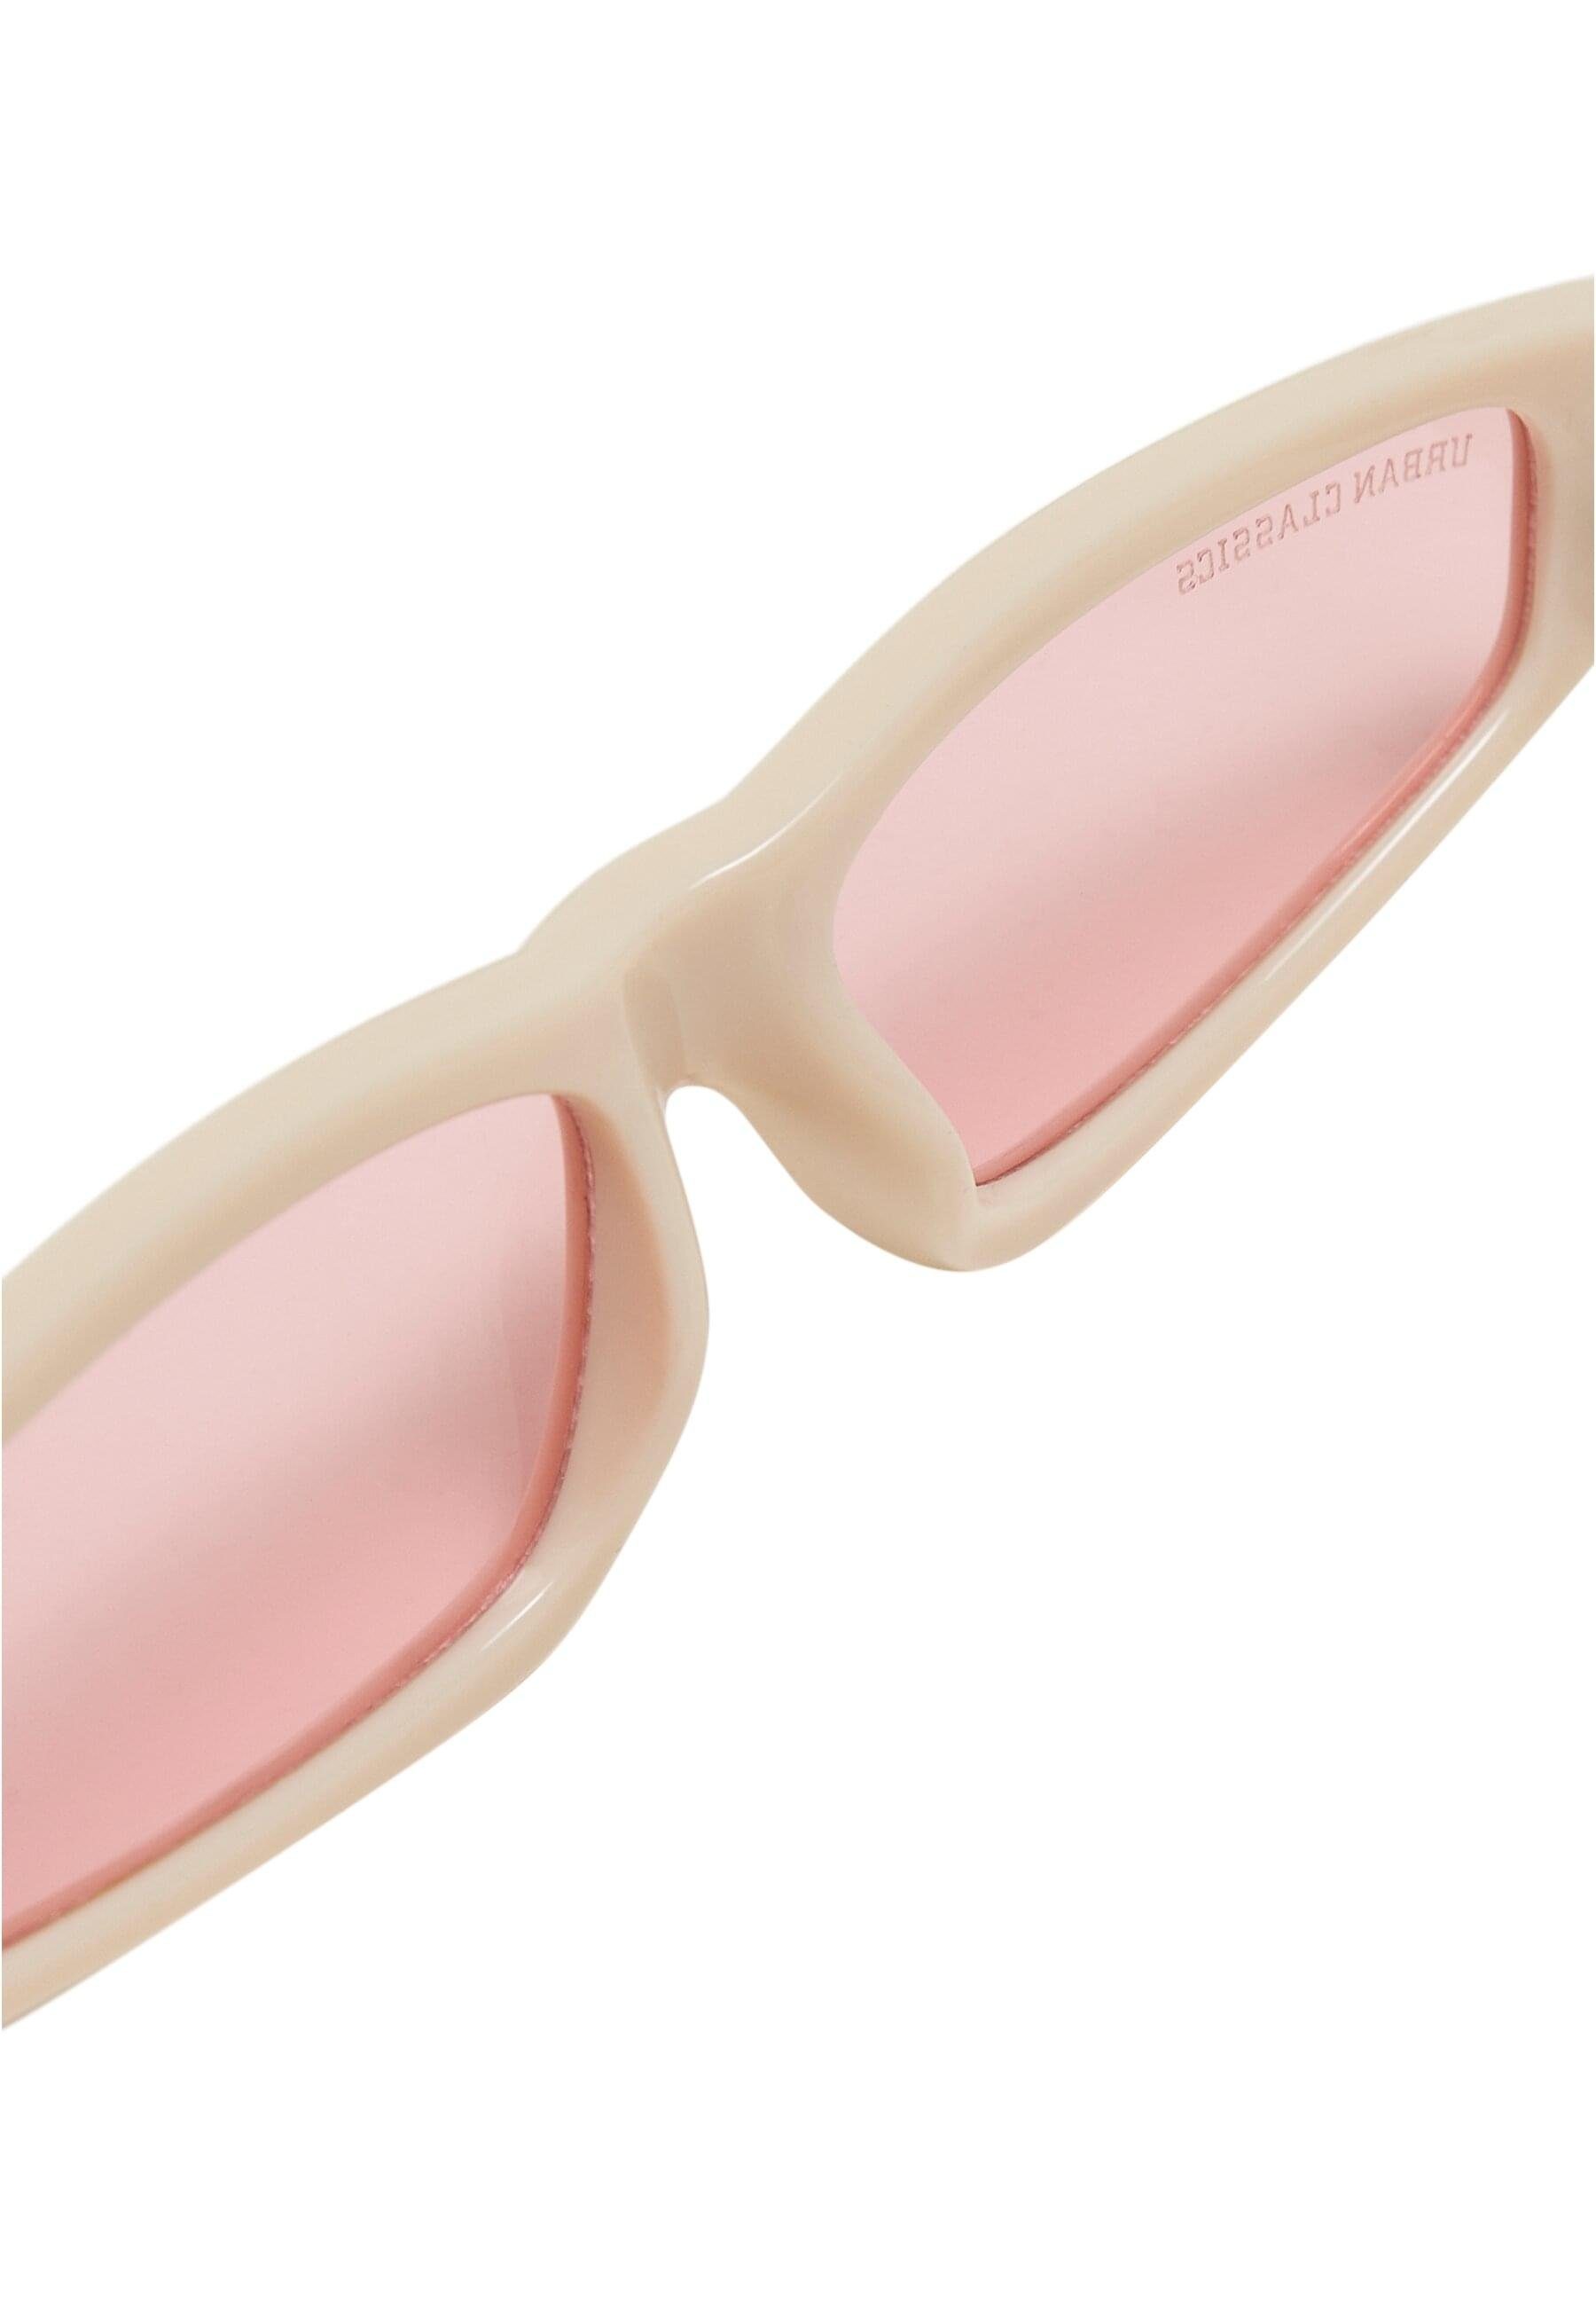 Unisex brown/brown+offwhite/pink Lefkada Sonnenbrille URBAN 2-Pack Sunglasses CLASSICS